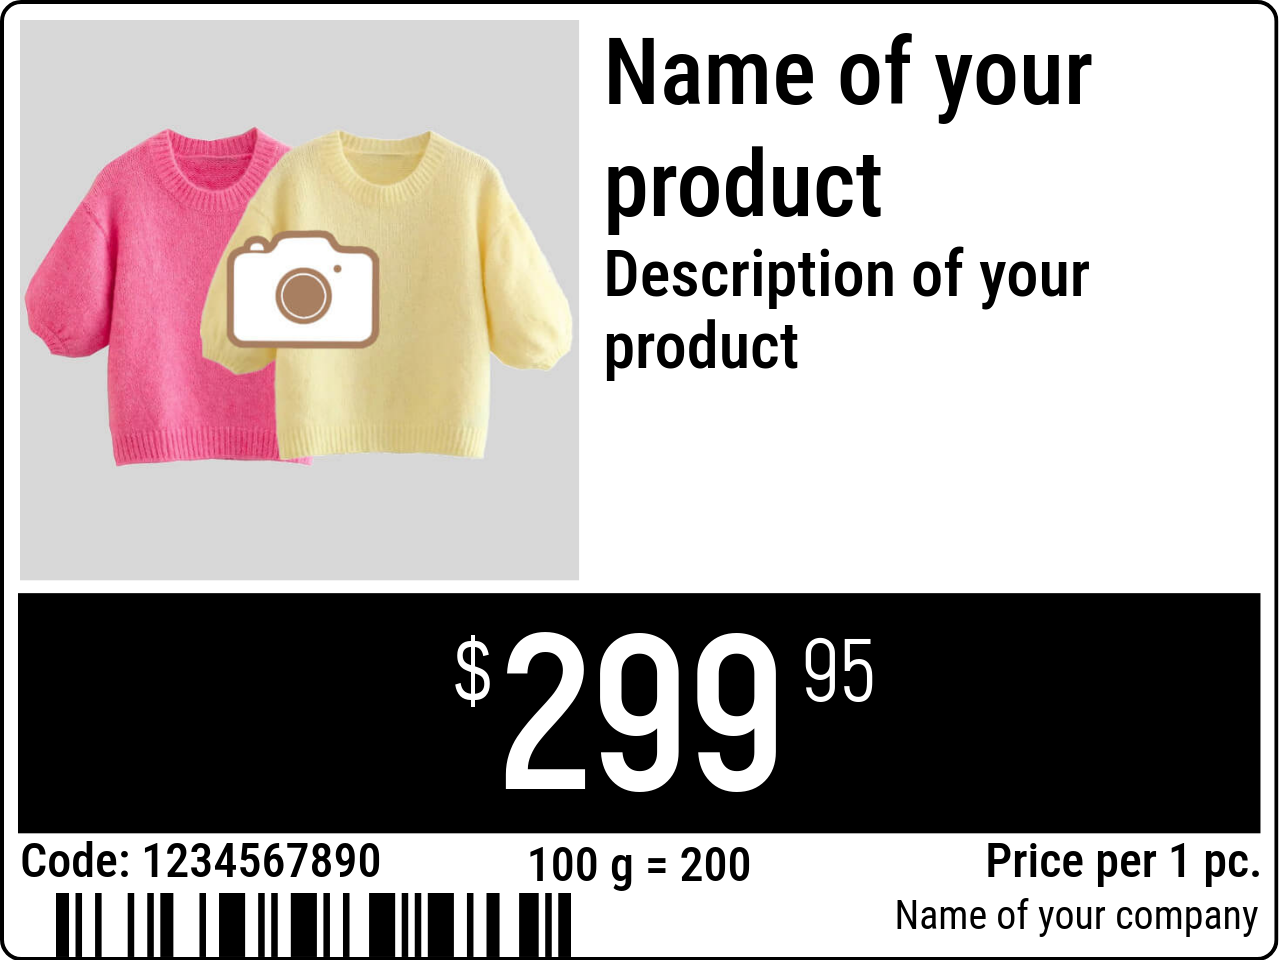 Price tag Original / Price tags with product image / Normal